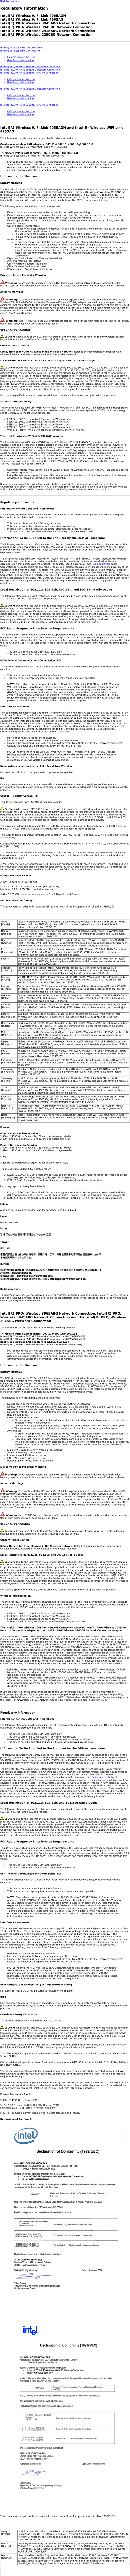 Back to Contents Regulatory InformationIntel(R) Wireless WiFi Link 4965AGN  Intel(R) Wireless WiFi Link 4965AG_  Intel(R) PRO/Wireless 3945ABG Network Connection Intel(R) PRO/Wireless 3945BG Network Connection Intel(R) PRO/Wireless 2915ABG Network Connection Intel(R) PRO/Wireless 2200BG Network Connection Intel(R) Wireless WiFi Link 4965AGN Intel(R) Wireless WiFi Link 4965AG ●     Information for the User●     Regulatory InformationIntel(R) PRO/Wireless 3965ABG Network Connection Intel(R) PRO/Wireless 3945ABG Network Connection Intel(R) PRO/Wireless 3945BG Network Connection ●     Information for the User ●     Regulatory InformationIntel(R) PRO/Wireless 2915ABG Network Connection ●     Information for the User●     Regulatory Information Intel(R) PRO/Wireless 2200BG Network Connection ●     Information for the User ●     Regulatory Information Intel(R) Wireless WiFi Link 4965AGN and Intel(R) Wireless WiFi Link 4965AG_ The information in this document applies to the following products: Quad-mode wireless LAN adapters (802.11a/802.11b/802.11g/802.11n) Intel(R) Wireless WiFi Link 4965AGN (model WM4965AGN) Tri-mode wireless LAN adapters (802.11a/802.11b/802.11g) Intel(R) Wireless WiFi Link 4965AG_ (model WM4965AG_) NOTE: Due to the evolving state of regulations and standards in the wireless LAN field (IEEE 802.11 and similar standards), the information provided herein is subject to change. Intel Corporation assumes no responsibility for errors or omissions in this document. Nor does Intel make any commitment to update the information contained herein. Information for the userSafety NoticesThe FCC with its action in ET Docket 96-8 has adopted a safety standard for human exposure to radio frequency (RF) electromagnetic energy emitted by FCC certified equipment. The Intel(R) Wireless WiFi Link 4965AGN or Intel(R) Wireless WiFi Link 4965AG_ adapter meet the Human Exposure limits found in OET Bulletin 65, supplement C, 2001, and ANSI/IEEE C95.1, 1992. Proper operation of this radio according to the instructions found in this manual will result in exposure substantially below the FCC’s recommended limits. The following safety precautions should be observed: ●     Do not touch or move antenna while the unit is transmitting or receiving.●     Do not hold any component containing the radio such that the antenna is very close or touching any exposed parts of the body, especially the face or eyes, while transmitting.●     Do not operate the radio or attempt to transmit data unless the antenna is connected; if not, the radio may be damaged.●     Use in specific environments: ❍     The use of wireless devices in hazardous locations is limited by the constraints posed by the safety directors of such environments.❍     The use of wireless devices on airplanes is governed by the Federal Aviation Administration (FAA).❍     The use of wireless devices in hospitals is restricted to the limits set forth by each hospital.●     Antenna use: ❍     In order to comply with FCC RF exposure limits, low gain integrated antennas should be located at a minimum distance of 20 cm (8 inches) or more from the body of all persons.❍     High-gain, wall-mount, or mast-mount antennas are designed to be professionally installed and should be located at a minimum distance of 30 cm (12 inches) or more from the body of all persons. Please contact your professional installer, VAR, or antenna manufacturer for proper installation requirements. ●     Explosive Device Proximity Warning (see below)●     Antenna Warning (see below)●     Use on Aircraft Caution (see below)●     Other Wireless Devices (see below)●     Power Supply (Access Point) (see below)Explosive Device Proximity WarningWarning: Do not operate a portable transmitter (such as a wireless network device) near unshielded blasting caps or in an explosive environment unless the device has been modified to be qualified for such use. Antenna Warnings Warning: To comply with the FCC and ANSI C95.1 RF exposure limits, it is recommended for the Intel(R) Wireless WiFi Link 4965AGN or Intel(R) Wireless WiFi Link 4965AG_ adapter installed in a desktop or portable computer, that the antenna for this device be installed so as to provide a separation distance of al least 20 cm (8 inches) from all persons and that the antenna must not be co-located or operating in conjunction with any other antenna or radio transmitter. It is recommended that the user limit exposure time if the antenna is positioned closer than 20 cm (8 inches).  Warning: Intel(R) PRO/Wireless LAN products are not designed for use with high-gain directional antennas. Use of such antennas with these products is illegal. Use On Aircraft Caution Caution: Regulations of the FCC and FAA prohibit airborne operation of radio-frequency wireless devices because their signals could interfere with critical aircraft instruments. Other Wireless DevicesSafety Notices for Other Devices in the Wireless Network: Refer to the documentation supplied with wireless Ethernet adapters or other devices in the wireless network. Local Restrictions on 802.11a, 802.11b, 802.11g and 802.11n Radio Usage Caution: Due to the fact that the frequencies used by 802.11a, 802.11b, 802.11g and 802.11n wireless LAN devices may not yet be harmonized in all countries, 802.11a, 802.11b, 802.11g and 802.11n products are designed for use only in specific countries, and are not allowed to be operated in countries other than those of designated use. As a user of these products, you are responsible for ensuring that the products are used only in the countries for which they were intended and for verifying that they are configured with the correct selection of frequency and channel for the country of use. The device transmit power control (TPC) interface is part of the Intel(R) PROSet/Wireless software. Operational restrictions for Equivalent Isotropic Radiated Power (EIRP) are provided by the system manufacturer. Any deviation from the permissible power and frequency settings for the country of use is an infringement of national law and may be punished as such. For country-specific information, see the additional compliance information supplied with the product. Wireless interoperabilityThe Intel(R) Wireless WiFi Link 4965AGN or Intel(R) Wireless WiFi Link 4965AG_ is designed to be interoperable with other wireless LAN products that are based on direct sequence spread spectrum (DSSS) radio technology and to comply with the following standards: ●     IEEE Std. 802.11b compliant Standard on Wireless LAN●     IEEE Std. 802.11g compliant Standard on Wireless LAN●     IEEE Std. 802.11a compliant Standard on Wireless LAN ●     IEEE Std. 802.11n compliant Standard on Wireless LAN ●     Wireless Fidelity (WiFi) certification, as defined by the Wi-Fi Alliance The Intel(R) Wireless WiFi Link 4965AGN adapterThe Intel(R) Wireless WiFi Link 4965AGN or Intel(R) Wireless WiFi Link 4965AG_ adapter, like other radio devices, emits radio frequency electromagnetic energy. The level of energy emitted by this device, however, is less than the electromagnetic energy emitted by other wireless devices such as mobile phones. The Intel(R) Wireless WiFi Link 4965AGN or Intel(R) Wireless WiFi Link 4965AG_ adapter wireless device operates within the guidelines found in radio frequency safety standards and recommendations. These standards and recommendations reflect the consensus of the scientific community and result from deliberations of panels and committees of scientists who continually review and interpret the extensive research literature. In some situations or environments, the use of the Intel(R) Wireless WiFi Link 4965AGN or Intel(R) Wireless WiFi Link 4965AG_ adapter may be restricted to: ●     Using the Intel(R) Wireless WiFi Link 4965AGN or Intel(R) Wireless WiFi Link 4965AG_ adapter equipment on board airplanes, or●     Using the adapter equipment in any other environment where the risk of interference with other devices or services is perceived or identified as being harmful.If you are uncertain of the policy that applies to the use of wireless devices in a specific organization or environment (an airport, for example), you are encouraged to ask for authorization to use the Intel(R) Wireless WiFi Link 4965AGN or Intel(R) Wireless WiFi Link 4965AG_ wireless devices before you turn it on. Regulatory informationInformation for the OEMs and Integrators:  The following statement must be included with all versions of this document supplied to an OEM or integrator, but should not be distributed to the end user. ●     This device is intended for OEM integrators only.●     This device cannot be co-located with any other transmitter.●     Please refer to the full Grant of Equipment document for other restrictions.●     This device must be operated and used with a locally approved access point.Information To Be Supplied to the End User by the OEM or Integrator The following regulatory and safety notices must be published in documentation supplied to the end user of the product or system incorporating an Intel(R) Wireless WiFi Link 4965AGN or Intel(R) Wireless WiFi Link 4965AG_ in compliance with local regulations.  Host system must be labeled with &quot;Contains FCC ID: XXXXXXXX&quot;, FCC ID displayed on label. The Intel(R) Wireless WiFi Link 4965AGN or Intel(R) Wireless WiFi Link 4965AG_ wireless network device must be installed and used in strict accordance with the manufacturer&apos;s instructions as described in the user documentation that comes with the product. For country-specific approvals, see Radio approvals. Intel Corporation is not responsible for any radio or television interference caused by unauthorized modification of the devices included with the Intel(R) Wireless WiFi Link 4965AGN or Intel(R) Wireless WiFi Link 4965AG_ adapter kit, or the substitution or attachment of connecting cables and equipment other than that specified by Intel Corporation. The correction of interference caused by such unauthorized modification, substitution or attachment is the responsibility of the user. Intel Corporation and its authorized resellers or distributors are not liable for any damage or violation of government regulations that may arise from the user failing to comply with these guidelines. Local Restriction of 802.11a, 802.11b, 802.11g, and 802.11n Radio Usage The following statement on local restrictions must be published as part of the compliance documentation for all 802.11a, 802.11b, 802.11g and 802.11n products.  Caution: Due to the fact that the frequencies used by 802.11a, 802.11b, 802.11g and 802.11n wireless LAN devices may not yet be harmonized in all countries, 802.11a, 802.11b, 802.11g and 802.11n products are designed for use only in specific countries, and are not allowed to be operated in countries other than those of designated use. As a user of these products, you are responsible for ensuring that the products are used only in the countries for which they were intended and for verifying that they are configured with the correct selection of frequency and channel for the country of use. Any deviation from permissible settings and restrictions in the country of use could be an infringement of national law and may be punished as such. FCC Radio Frequency Interference Requirements This device is restricted to indoor use due to its operation in the 5.15 to 5.25 GHz frequency range. FCC requires this product to be used indoors for the frequency range 5.15 to 5.25 GHz to reduce the potential for harmful interference to co-channel Mobile Satellite systems. High power radars are allocated as primary users of the 5.25 to 5.35 GHz and 5.65 to 5.85 GHz bands. These radar stations can cause interference with and /or damage this device. ●     This device is intended for OEM integrators only.●     This device cannot be co-located with any other transmitter. USA—Federal Communications Commission (FCC)This device complies with Part 15 of the FCC Rules. Operation of the device is subject to the following two conditions:●     This device may not cause harmful interference. ●     This device must accept any interference that may cause undesired operation. NOTE: The radiated output power of the Intel(R) Wireless WiFi Link 4965AGN or Intel(R) Wireless WiFi Link 4965AG_ adapter wireless network device is far below the FCC radio frequency exposure limits. Nevertheless, the Intel(R) Wireless WiFi Link 4965AGN or Intel(R) Wireless WiFi Link 4965AG_ adapter wireless device should be used in such a manner that the potential for human contact during normal operation is minimized. To avoid the possibility of exceeding the FCC radio frequency exposure limits, you should keep a distance of at least 20 cm between you (or any other person in the vicinity) and the antenna that is built into the computer. Interference statementThis equipment has been tested and found to comply with the limits for a Class B digital device, pursuant to Part 15 of the FCC Rules. These limits are designed to provide reasonable protection against harmful interference in a residential installation. This equipment generates, uses, and can radiate radio frequency energy. If the equipment is not installed and used in accordance with the instructions, the equipment may cause harmful interference to radio communications. There is no guarantee, however, that such interference will not occur in a particular installation. If this equipment does cause harmful interference to radio or television reception (which can be determined by turning the equipment off and on), the user is encouraged to try to correct the interference by taking one or more of the following measures: ●     Reorient or relocate the receiving antenna. ●     Increase the distance between the equipment and the receiver. ●     Connect the equipment to an outlet on a circuit different from that to which the receiver is connected. ●     Consult the dealer or an experienced radio/TV technician for help. NOTE:The Intel(R) Wireless WiFi Link 4965AGN or Intel(R) Wireless WiFi Link 4965AG_ adapter wireless network device must be installed and used in strict accordance with the manufacturer&apos;s instructions as described in the user documentation that comes with the product. Any other installation or use will violate FCC Part 15 regulations.Underwriters Laboratories Inc. (UL) Regulatory Warning For use in (or with) UL Listed personal computers or compatible. Brazil Este equipamento opera em caráter secundário, isto é, não tem direito a proteção contra interferência prejudicial, mesmo de estações do mesmo tipo, e não pode causar interferência a sistemas operando em caráter primário. Canada—Industry Canada (IC)This device complies with RSS210 of Industry Canada.  Caution: When using IEEE 802.11a wireless LAN, this product is restricted to indoor use due to its operation in the 5.15- to 5.25-GHz frequency range. Industry Canada requires this product to be used indoors for the frequency range of 5.15 GHz to 5.25 GHz to reduce the potential for harmful interference to co-channel mobile satellite systems. High power radar is allocated as the primary user of the 5.25- to 5.35-GHz and 5.65 to 5.85-GHz bands. These radar stations can cause interference with and/or damage to this device.The maximum allowed antenna gain for use with this device is 6dBi in order to comply with the E.I.R.P limit for the 5.25- to 5.35 and 5.725 to 5.85GHz frequency range in point-to-point operation.This Class B digital apparatus complies with Canadian ICES-003, Issue 4, and RSS-210, No 4 (Dec 2000) and No 5 (Nov 2001). Cet appariel numérique de la classe B est conforme à la norme NMB-003, No. 4, et CNR-210, No 4 (Dec 2000) et No 5 (Nov 2001).. &quot;To prevent radio interference to the licensed service, this device is intended to be operated indoors and away from windows to provide maximum shielding. Equipment (or its transmit antenna) that is installed outdoors is subject to licensing.&quot; « Pour empêcher que cet appareil cause du brouillage au service faisant l&apos;objet d&apos;une licence, il doit être utilisé a l&apos;intérieur et devrait être placé loin des fenêtres afinde fournir un écran de blindage maximal. Si le matériel (ou son antenne d&apos;émission) est installé à l&apos;extérieur, il doit faire l&apos;objet d&apos;une licence. » Europe Frequency Bands 2.400 - 2.4835 GHz (Europe ETSI)  5.15 - 5.35 GHz and 5.47-5.725 GHz (Europe ETSI) Low band 5.25 - 5.35 GHz is for indoor use only  5.47 - 5.725 GHz is current not allowed in Czech Republic and France. Declaration of ConformityThis equipment complies with the essential requirements of the European Union directive 1999/5/EC.  •esky [Czech] Intel(R) Corporation tímto prohlašuje, že tento Intel(R) Wireless WiFi Link 4965AGN or Intel(R) Wireless WiFi Link 4965AG_ je ve shodě se základními požadavky a dalšími p•íslušnými ustanoveními směrnice 1999/5/ES.Dansk [Danish] Undertegnede Intel(R) Corporation erklærer herved, at følgende udstyr Intel(R) Wireless WiFi Link 4965AGN or Intel(R) Wireless WiFi Link 4965AG_ overholder de væsentlige krav og øvrige relevante krav i direktiv 1999/5/EF.Deutsch [German] Hiermit erklärt Intel(R) Corporation, dass sich das Gerät Intel(R) Wireless WiFi Link 4965AGN or Intel(R) Wireless WiFi Link 4965AG_ in Übereinstimmung mit den grundlegenden Anforderungen und den übrigen einschlägigen Bestimmungen der Richtlinie 1999/5/EG befindet. Esti [Estonian] Käesolevaga kinnitab Intel(R) Corporation seadme Intel(R) Wireless WiFi Link 4965AGN or Intel(R) Wireless WiFi Link 4965AG_ vastavust direktiivi 1999/5/EÜ põhinõuetele ja nimetatud direktiivist tulenevatele teistele asjakohastele sätetele.English Hereby, Intel(R) Corporation, declares that this Intel(R) Wireless WiFi Link 4965AGN or Intel(R) Wireless WiFi Link 4965AG_ is in compliance with the essential requirements and other relevant provisions of Directive 1999/5/EC.Español [Spanish] Por medio de la presente Intel(R) Corporation declara que el Intel(R) Wireless WiFi Link 4965AGN or Intel(R) Wireless WiFi Link 4965AG_ cumple con los requisitos esenciales y cualesquiera otras disposiciones aplicables o exigibles de la Directiva 1999/5/CE. Ελληνικ• [Greek] ΜΕ ΤΗΝ ΠΑΡΟΥΣΑ Intel(R) Corporation ∆ΗΛΩΝΕΙ ΟΤΙ Intel(R) Wireless WiFi Link 4965AGN or Intel(R) Wireless WiFi Link 4965AG_ ΣΥΜΜΟΡΦΩΝΕΤΑΙ ΠΡΟΣ ΤΙΣ ΟΥΣΙΩ∆ΕΙΣ ΑΠΑΙΤΗΣΕΙΣ ΚΑΙ ΤΙΣ ΛΟΙΠΕΣ ΣΧΕΤΙΚΕΣ ∆ΙΑΤΑΞΕΙΣ ΤΗΣ Ο∆ΗΓΙΑΣ 1999/5/ΕΚ.Français [French]  Par la présente Intel(R) Corporation déclare que l&apos;appareil Intel(R) Wireless WiFi Link 4965AGN or Intel(R) Wireless WiFi Link 4965AG_ est conforme aux exigences essentielles et aux autres dispositions pertinentes de la directive 1999/5/CE.Italiano [Italian] Con la presente Intel(R) Corporation dichiara che questo Intel(R) Wireless WiFi Link 4965AGN or Intel(R) Wireless WiFi Link 4965AG_ è conforme ai requisiti essenziali ed alle altre disposizioni pertinenti stabilite dalla direttiva 1999/5/CE. Latviski [Latvian] Ar šo Intel(R) Corporation  deklarē, ka Intel(R) Wireless WiFi Link 4965AGN or Intel(R) Wireless WiFi Link 4965AG_ atbilst Direktīvas 1999/5/EK būtiskajām prasībām un citiem ar to saistītajiem noteikumiem.Lietuvi• [Lithuanian] Šiuo Intel(R) Corporation deklaruoja, kad šis Intel(R) Wireless WiFi Link 4965AGN or Intel(R) Wireless WiFi Link 4965AG_ atitinka esminius reikalavimus ir kitas 1999/5/EB Direktyvos nuostatas.Nederlands [Dutch] Hierbij verklaart Intel(R) Corporation dat het toestel Intel(R) Wireless WiFi Link 4965AGN or Intel(R) Wireless WiFi Link 4965AG_ in overeenstemming is met de essentiële eisen en de andere relevante bepalingen van richtlijn 1999/5/EG. Malti [Maltese] Hawnhekk, Intel(R) Corporation, jiddikjara li dan Intel(R) Wireless WiFi Link 4965AGN or Intel(R) Wireless WiFi Link 4965AG_ jikkonforma mal-ħti•ijiet essenzjali u ma provvedimenti oħrajn relevanti li hemm fid-Dirrettiva 1999/5/EC.Magyar [Hungary] Alulírott, Intel(R) Corporation nyilatkozom, hogy a Intel(R) Wireless WiFi Link 4965AGN or Intel(R) Wireless WiFi Link 4965AG_ megfelel a vonatkozó alapvetõ követelményeknek és az 1999/5/EC irányelv egyéb elõírásainak.Polski [Polish] Niniejszym, Intel(R) Corporation, o•wiadcza, •e Intel(R) Wireless WiFi Link 4965AGN or Intel(R) Wireless WiFi Link 4965AG_ jest zgodne z zasadniczymi wymaganiami oraz innymi stosownymi postanowieniami Dyrektywy 1999/5/WE.Português [Portuguese] Intel(R) Corporation declara que este Intel(R) Wireless WiFi Link 4965AGN or Intel(R) Wireless WiFi Link 4965AG_ está conforme com os requisitos essenciais e outras disposições da Directiva 1999/5/CE. Slovensko [Slovenian] Šiuo Intel(R) Corporation izjavlja, da je ta Intel(R) Wireless WiFi Link 4965AGN or Intel(R) Wireless WiFi Link 4965AG_ v skladu z bistvenimi zahtevami in ostalimi relevantnimi dolo•ili direktive 1999/5/ES.Slovensky [Slovak] Intel(R) Corporation týmto vyhlasuje, že Intel(R) Wireless WiFi Link 4965AGN or Intel(R) Wireless WiFi Link 4965AG_ sp••a základné požiadavky a všetky príslušné ustanovenia Smernice 1999/5/ES.Suomi [Finnish] Intel(R) Corporation vakuuttaa täten että Intel (R) Wireless WiFi Link 4965AGN or Intel(R) Wireless WiFi Link 4965AG_ tyyppinen laite on direktiivin 1999/5/EY oleellisten vaatimusten ja sitä koskevien direktiivin muiden ehtojen mukainen. Svenska [Swedish] Härmed intygar Intel(R) Corporation att denna Intel(R) Wireless WiFi Link 4965AGN or Intel(R) Wireless WiFi Link 4965AG_ står I överensstämmelse med de väsentliga egenskapskrav och övriga relevanta bestämmelser som framgår av direktiv 1999/5/EG.Íslenska [Icelandic] Hér með lýsir Intel(R) Corporation yfir því að Intel(R) Wireless WiFi Link 4965AGN or Intel(R) Wireless WiFi Link 4965AG_ er í samræmi við grunnkröfur og aðrar kröfur, sem gerðar eru í tilskipun 1999/5/EC. Norsk [Norwegian]:  Intel(R) Corporation erklærer herved at utstyret Intel(R) Wireless WiFi Link 4965AGN or Intel(R) Wireless WiFi Link 4965AG_ er i samsvar med de grunnleggende krav og øvrige relevante krav i direktiv 1999/5/EF. France Pour la France métropolitaine 2.400 - 2.4835 GHz (Canaux 1à 13) autorisé en usage intérieur  2.400 -2.454 GHz (canaux 1 à 7) autorisé en usage extérieur Pour la Guyane et la Réunion  2.400 - 2.4835 GHz (Canaux 1à 13) autorisé en usage intérieur .  2.420 - 2.4835 GHz (canaux 5 à 13) autorisé en usage extérieur Italy A general authorization is requested for outdoor use in Italy The use of these equipments is regulated by: 1.  D.L.gs 1.8.2003, n. 259, article 104 (activity subject to general authorization) for outdoor use and article 105 (free use) for indoor use, in both cases for private use. 2.  D.M. 28.5.03, for supply to public of RLAN access to networks and telecom services. L’uso degli apparati è regolamentato da: 1.  D.L.gs 1.8.2003, n. 259, articoli 104 (attività soggette ad autorizzazione generale) se utilizzati al di fuori del proprio fondo e 105 (libero uso) se utilizzati entro il proprio fondo, in entrambi i casi per uso private. 2.  D.M. 28.5.03, per la fornitura al pubblico dell’accesso R-LAN alle reti e ai servizi di telecomunicazioni. Latvia A license is required for outdoor use for operation in 2.4 GHz band. JapanIndoor use only.Korea  Taiwan  Radio approvalsTo determine whether you are allowed to use your wireless network device in a specific country, please check to see if the radio type number that is printed on the identification label of your device is listed in the manufacture OEM Regulatory Guidance document. Intel(R) PRO/Wireless 3965ABG Network Connection, Intel(R) PRO/Wireless 3945ABG Network Connection and the Intel(R) PRO/Wireless 3945BG Network ConnectionThe information in this document applies to the following products: Tri-mode wireless LAN adapters (802.11a/802.11b/802.11g ) Intel(R) PRO/Wireless 3965ABG Network Connection (model WM3965ABG)  Intel(R) PRO/Wireless 3945ABG Network Connection (model WM3945ABG)  Dual-mode wireless LAN adapters (802.11b/802.11g ) Intel(R) PRO/Wireless 3945BG Network Connection (model WM3945BG) NOTE: Due to the evolving state of regulations and standards in the wireless LAN field (IEEE 802.11 and similar standards), the information provided herein is subject to change. Intel Corporation assumes no responsibility for errors or omissions in this document. Nor does Intel make any commitment to update the information contained herein. Information for the userSafety NoticesThe FCC with its action in ET Docket 96-8 has adopted a safety standard for human exposure to radio frequency (RF) electromagnetic energy emitted by FCC certified equipment. The Intel(R) PRO/Wireless 3965ABG Network Connection adapter, Intel(R) PRO/Wireless 3945ABG Network Connection adapter, or the Intel(R) PRO/Wireless 3945BG Network Connection adapter meet the Human Exposure limits found in OET Bulletin 65, supplement C, 2001, and ANSI/IEEE C95.1, 1992. Proper operation of this radio according to the instructions found in this manual will result in exposure substantially below the FCC’s recommended limits. The following safety precautions should be observed: ●     Do not touch or move antenna while the unit is transmitting or receiving.●     Do not hold any component containing the radio such that the antenna is very close or touching any exposed parts of the body, especially the face or eyes, while transmitting.●     Do not operate the radio or attempt to transmit data unless the antenna is connected; if not, the radio may be damaged.●     Use in specific environments: ❍     The use of wireless devices in hazardous locations is limited by the constraints posed by the safety directors of such environments.❍     The use of wireless devices on airplanes is governed by the Federal Aviation Administration (FAA).❍     The use of wireless devices in hospitals is restricted to the limits set forth by each hospital.●     Antenna use: ❍     In order to comply with FCC RF exposure limits, low gain integrated antennas should be located at a minimum distance of 20 cm (8 inches) or more from the body of all persons.❍     High-gain, wall-mount, or mast-mount antennas are designed to be professionally installed and should be located at a minimum distance of 30 cm (12 inches) or more from the body of all persons. Please contact your professional installer, VAR, or antenna manufacturer for proper installation requirements. ●     Explosive Device Proximity Warning (see below)●     Antenna Warning (see below)●     Use on Aircraft Caution (see below)●     Other Wireless Devices (see below)●     Power Supply (Access Point) (see below)Explosive Device Proximity WarningWarning: Do not operate a portable transmitter (such as a wireless network device) near unshielded blasting caps or in an explosive environment unless the device has been modified to be qualified for such use. Antenna Warnings Warning: To comply with the FCC and ANSI C95.1 RF exposure limits, it is recommended for the Intel(R) PRO/Wireless 3965ABG Network Connection adapter, Intel(R) PRO/Wireless 3945ABG Network Connection adapter, or the Intel(R) PRO/Wireless 3945BG Network Connection adapter installed in a desktop or portable computer, that the antenna for this device be installed so as to provide a separation distance of al least 20 cm (8 inches) from all persons and that the antenna must not be co-located or operating in conjunction with any other antenna or radio transmitter. It is recommended that the user limit exposure time if the antenna is positioned closer than 20 cm (8 inches).  Warning: Intel(R) PRO/Wireless LAN products are not designed for use with high-gain directional antennas. Use of such antennas with these products is illegal. Use On Aircraft Caution Caution: Regulations of the FCC and FAA prohibit airborne operation of radio-frequency wireless devices because their signals could interfere with critical aircraft instruments. Other Wireless DevicesSafety Notices for Other Devices in the Wireless Network: Refer to the documentation supplied with wireless Ethernet adapters or other devices in the wireless network. Local Restrictions on 802.11a, 802.11b, and 802.11g Radio Usage Caution: Due to the fact that the frequencies used by 802.11a, 802.11b and 802.11g wireless LAN devices may not yet be harmonized in all countries, 802.11a, 802.11b, and 802.11g products are designed for use only in specific countries, and are not allowed to be operated in countries other than those of designated use. As a user of these products, you are responsible for ensuring that the products are used only in the countries for which they were intended and for verifying that they are configured with the correct selection of frequency and channel for the country of use. The device transmit power control (TPC) interface is part of the Intel(R) PROSet/Wireless software. Operational restrictions for Equivalent Isotropic Radiated Power (EIRP) are provided by the system manufacturer. Any deviation from the permissible power and frequency settings for the country of use is an infringement of national law and may be punished as such. For country-specific information, see the additional compliance information supplied with the product. Wireless interoperabilityThe Intel(R) PRO/Wireless 3965ABG Network Connection adapter or the Intel(R) PRO/Wireless 3945BG Network Connection are designed to be interoperable with other wireless LAN products that are based on direct sequence spread spectrum (DSSS) radio technology and to comply with the following standards: ●     IEEE Std. 802.11b compliant Standard on Wireless LAN●     IEEE Std. 802.11g compliant Standard on Wireless LAN●     IEEE Std. 802.11a compliant Standard on Wireless LAN ●     Wireless Fidelity (WiFi) certification, as defined by the Wi-Fi Alliance The Intel(R) PRO/Wireless 3965ABG Network Connection adapter, Intel(R) PRO/Wireless 3945ABG Network Connection adapter or the Intel(R) PRO/Wireless 3945BG Network Connection adapterThe Intel(R) PRO/Wireless 3965ABG Network Connection adapter, Intel(R) PRO/Wireless 3945ABG Network Connection adapter or the Intel(R) PRO/Wireless 3945BG Network Connection adapter, like other radio devices, emits radio frequency electromagnetic energy. The level of energy emitted by this device, however, is less than the electromagnetic energy emitted by other wireless devices such as mobile phones. The Intel(R) PRO/Wireless 3965ABG Network Connection adapter, Intel(R) PRO/Wireless 3945ABG Network Connection adapter, or the Intel(R) PRO/Wireless 3945BG Network Connection adapter wireless device operates within the guidelines found in radio frequency safety standards and recommendations. These standards and recommendations reflect the consensus of the scientific community and result from deliberations of panels and committees of scientists who continually review and interpret the extensive research literature. In some situations or environments, the use of the Intel(R) PRO/Wireless 3965ABG Network Connection adapter, Intel(R) PRO/Wireless 3945ABG Network Connection adapter, or the Intel(R) PRO/Wireless 3945BG Network Connection adapter may be restricted to: ●     Using the Intel(R) PRO/Wireless 3965ABG Network Connection adapter, Intel(R) PRO/Wireless 3945ABG Network Connection adapter, or the Intel(R) PRO/Wireless 3945BG Network Connection adapter equipment on board airplanes, or●     Using the Intel(R) PRO/Wireless 3965ABG Network Connection, Intel(R) PRO/Wireless 3945ABG Network Connection adapter or the Intel(R) PRO/Wireless 3945BG Network Connection adapter equipment in any other environment where the risk of interference with other devices or services is perceived or identified as being harmful.If you are uncertain of the policy that applies to the use of wireless devices in a specific organization or environment (an airport, for example), you are encouraged to ask for authorization to use the Intel(R) PRO/Wireless 3965ABG Network Connection adapter, Intel(R) PRO/Wireless 3945ABG Network Connection adapter, or the Intel(R) PRO/Wireless 3945BG Network Connection wireless devices before you turn it on. Regulatory informationInformation for the OEMs and Integrators:  The following statement must be included with all versions of this document supplied to an OEM or integrator, but should not be distributed to the end user. ●     This device is intended for OEM integrators only.●     This device cannot be co-located with any other transmitter.●     Please refer to the full Grant of Equipment document for other restrictions.●     This device must be operated and used with a locally approved access point.Information To Be Supplied to the End User by the OEM or Integrator The following regulatory and safety notices must be published in documentation supplied to the end user of the product or system incorporating an Intel(R) PRO/Wireless 3965ABG Network Connection, Intel(R) PRO/Wireless 3945ABG Network Connection or an Intel(R) PRO/Wireless 3945BG Network Connection in compliance with local regulations.  Host system must be labeled with &quot;Contains FCC ID: XXXXXXXX&quot;, FCC ID displayed on label. The Intel(R) PRO/Wireless 3965ABG Network Connection adapter, Intel(R) PRO/Wireless 3945ABG Network Connection adapter, or the Intel(R) PRO/Wireless 3945BG Network Connection wireless network device must be installed and used in strict accordance with the manufacturer&apos;s instructions as described in the user documentation that comes with the product. For country-specific approvals, see Radio approvals. Intel Corporation is not responsible for any radio or television interference caused by unauthorized modification of the devices included with the Intel(R) PRO/Wireless 3965ABG Network Connection, Intel(R) PRO/Wireless 3945ABG Network Connection or the Intel(R) PRO/Wireless 3945BG Network Connection adapter kit, or the substitution or attachment of connecting cables and equipment other than that specified by Intel Corporation. The correction of interference caused by such unauthorized modification, substitution or attachment is the responsibility of the user. Intel Corporation and its authorized resellers or distributors are not liable for any damage or violation of government regulations that may arise from the user failing to comply with these guidelines. Local Restriction of 802.11a, 802.11b, and 802.11g Radio Usage The following statement on local restrictions must be published as part of the compliance documentation for all 802.11a, 802.11b, and 802.11g products.  Caution: Due to the fact that the frequencies used by 802.11a, 802.11b, and 802.11g wireless LAN devices may not yet be harmonized in all countries, 802.11a, 802.11b, and 802.11g products are designed for use only in specific countries, and are not allowed to be operated in countries other than those of designated use. As a user of these products, you are responsible for ensuring that the products are used only in the countries for which they were intended and for verifying that they are configured with the correct selection of frequency and channel for the country of use. Any deviation from permissible settings and restrictions in the country of use could be an infringement of national law and may be punished as such. FCC Radio Frequency Interference Requirements This device is restricted to indoor use due to its operation in the 5.15 to 5.25 GHz frequency range. FCC requires this product to be used indoors for the frequency range 5.15 to 5.25 GHz to reduce the potential for harmful interference to co-channel Mobile Satellite systems. High power radars are allocated as primary users of the 5.25 to 5.35 GHz and 5.65 to 5.85 GHz bands. These radar stations can cause interference with and /or damage this device. ●     This device is intended for OEM integrators only.●     This device cannot be co-located with any other transmitter. USA—Federal Communications Commission (FCC)This device complies with Part 15 of the FCC Rules. Operation of the device is subject to the following two conditions: ●     This device may not cause harmful interference. ●     This device must accept any interference that may cause undesired operation. NOTE: The radiated output power of the Intel(R) PRO/Wireless 3965ABG Network Connection adapter, Intel(R) PRO/Wireless 3945ABG Network Connection adapter, or the Intel(R) PRO/Wireless 3945BG Network Connection adapter wireless network device is far below the FCC radio frequency exposure limits. Nevertheless, the Intel(R) PRO/Wireless LAN wireless network device should be used in such a manner that the potential for human contact during normal operation is minimized. To avoid the possibility of exceeding the FCC radio frequency exposure limits, you should keep a distance of at least 20 cm between you (or any other person in the vicinity) and the antenna that is built into the computer. Interference statementThis equipment has been tested and found to comply with the limits for a Class B digital device, pursuant to Part 15 of the FCC Rules. These limits are designed to provide reasonable protection against harmful interference in a residential installation. This equipment generates, uses, and can radiate radio frequency energy. If the equipment is not installed and used in accordance with the instructions, the equipment may cause harmful interference to radio communications. There is no guarantee, however, that such interference will not occur in a particular installation. If this equipment does cause harmful interference to radio or television reception (which can be determined by turning the equipment off and on), the user is encouraged to try to correct the interference by taking one or more of the following measures: ●     Reorient or relocate the receiving antenna. ●     Increase the distance between the equipment and the receiver. ●     Connect the equipment to an outlet on a circuit different from that to which the receiver is connected. ●     Consult the dealer or an experienced radio/TV technician for help. NOTE:The Intel(R) PRO/Wireless 3965ABG Network Connection adapter, Intel(R) PRO/Wireless 3945ABG Network Connection adapter, or the Intel(R) PRO/Wireless 3945BG Network Connection adapter wireless network device must be installed and used in strict accordance with the manufacturer&apos;s instructions as described in the user documentation that comes with the product. Any other installation or use will violate FCC Part 15 regulations. Underwriters Laboratories Inc. (UL) Regulatory Warning For use in (or with) UL Listed personal computers or compatible. Brazil Este equipamento opera em caráter secundário, isto é, não tem direito a proteção contra interferência prejudicial, mesmo de estações do mesmo tipo, e não pode causar interferência a sistemas operando em caráter primário. Canada—Industry Canada (IC)This device complies with RSS210 of Industry Canada.  Caution: When using IEEE 802.11a wireless LAN, this product is restricted to indoor use due to its operation in the 5.15- to 5.25-GHz frequency range. Industry Canada requires this product to be used indoors for the frequency range of 5.15 GHz to 5.25 GHz to reduce the potential for harmful interference to co-channel mobile satellite systems. High power radar is allocated as the primary user of the 5.25- to 5.35-GHz and 5.65 to 5.85-GHz bands. These radar stations can cause interference with and/or damage to this device.The maximum allowed antenna gain for use with this device is 6dBi in order to comply with the E.I.R.P limit for the 5.25- to 5.35 and 5.725 to 5.85GHz frequency range in point-to-point operation.This Class B digital apparatus complies with Canadian ICES-003, Issue 4, and RSS-210, No 4 (Dec 2000) and No 5 (Nov 2001). Cet appariel numérique de la classe B est conforme à la norme NMB-003, No. 4, et CNR-210, No 4 (Dec 2000) et No 5 (Nov 2001).. &quot;To prevent radio interference to the licensed service, this device is intended to be operated indoors and away from windows to provide maximum shielding. Equipment (or its transmit antenna) that is installed outdoors is subject to licensing.&quot; « Pour empêcher que cet appareil cause du brouillage au service faisant l&apos;objet d&apos;une licence, il doit être utilisé a l&apos;intérieur et devrait être placé loin des fenêtres afinde fournir un écran de blindage maximal. Si le matériel (ou son antenne d&apos;émission) est installé à l&apos;extérieur, il doit faire l&apos;objet d&apos;une licence. » Europe Frequency Bands 2.400 - 2.4835 GHz (Europe ETSI)  5.15 - 5.35 GHz and 5.47-5.725 GHz (Europe ETSI) Low band 5.25 - 5.35 GHz is for indoor use only  5.47 - 5.725 GHz is current not allowed in Czech Republic and France. Declaration of ConformityThis equipment complies with the essential requirements of the European Union directive 1999/5/EC.  •esky [Czech] Intel(R) Corporation tímto prohlašuje, že tento Intel(R) PRO/Wireless 3965ABG Network Connection (Intel(R) PRO/Wireless 3945ABG Network Connection, Intel(R) PRO/Wireless 3945BG Network Connection) je ve shodě se základními požadavky a dalšími p•íslušnými ustanoveními směrnice 1999/5/ES.Dansk [Danish] Undertegnede Intel(R) Corporation erklærer herved, at følgende udstyr Intel(R) PRO/Wireless 3965ABG Network Connection (Intel(R) PRO/Wireless 3945ABG Network Connection, Intel(R) PRO/Wireless 3945BG Network Connection) overholder de væsentlige krav og øvrige relevante krav i direktiv 1999/5/EF.Deutsch [German] Hiermit erklärt Intel(R) Corporation, dass sich das Gerät Intel(R) PRO/Wireless 3965ABG Network Connection (Intel(R) PRO/Wireless 3945ABG Network Connection, Intel(R) PRO/Wireless 3945BG Network Connection in Übereinstimmung mit den grundlegenden Anforderungen und den übrigen einschlägigen Bestimmungen der Richtlinie 1999/5/EG befindet. 